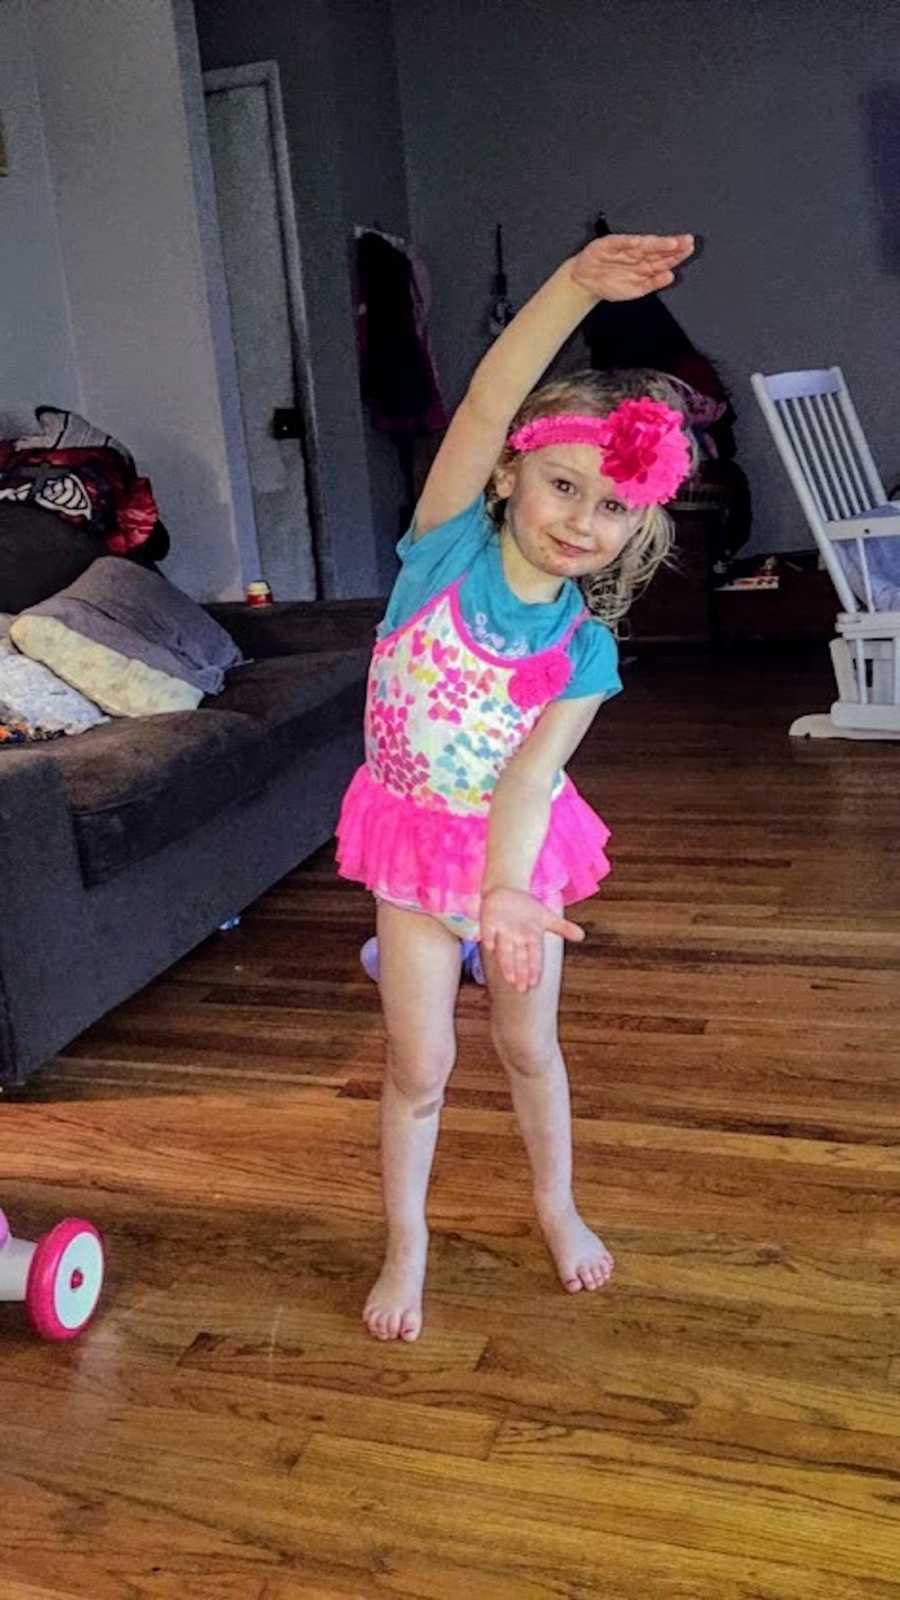 Little girl stands in home doing a ballet pose